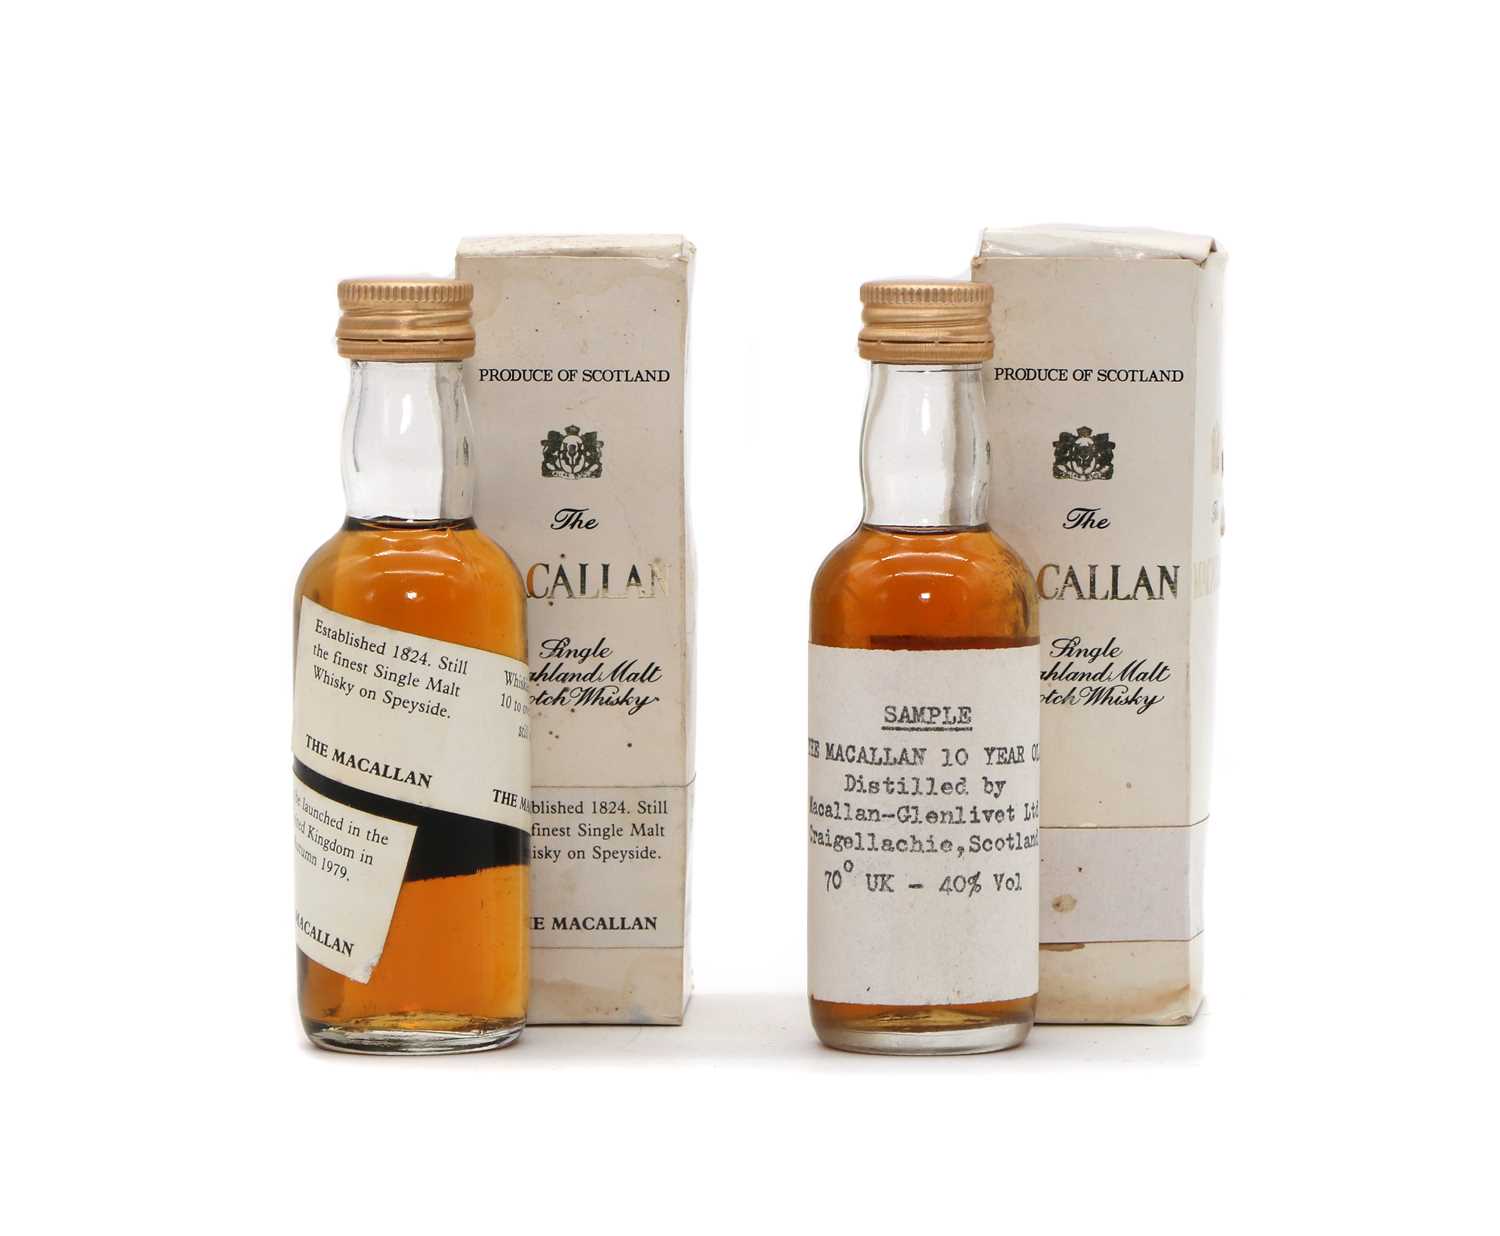 Lot 325 - The Macallan spiral label miniature malt Scotch Whisky, 40% (1) and another miniature